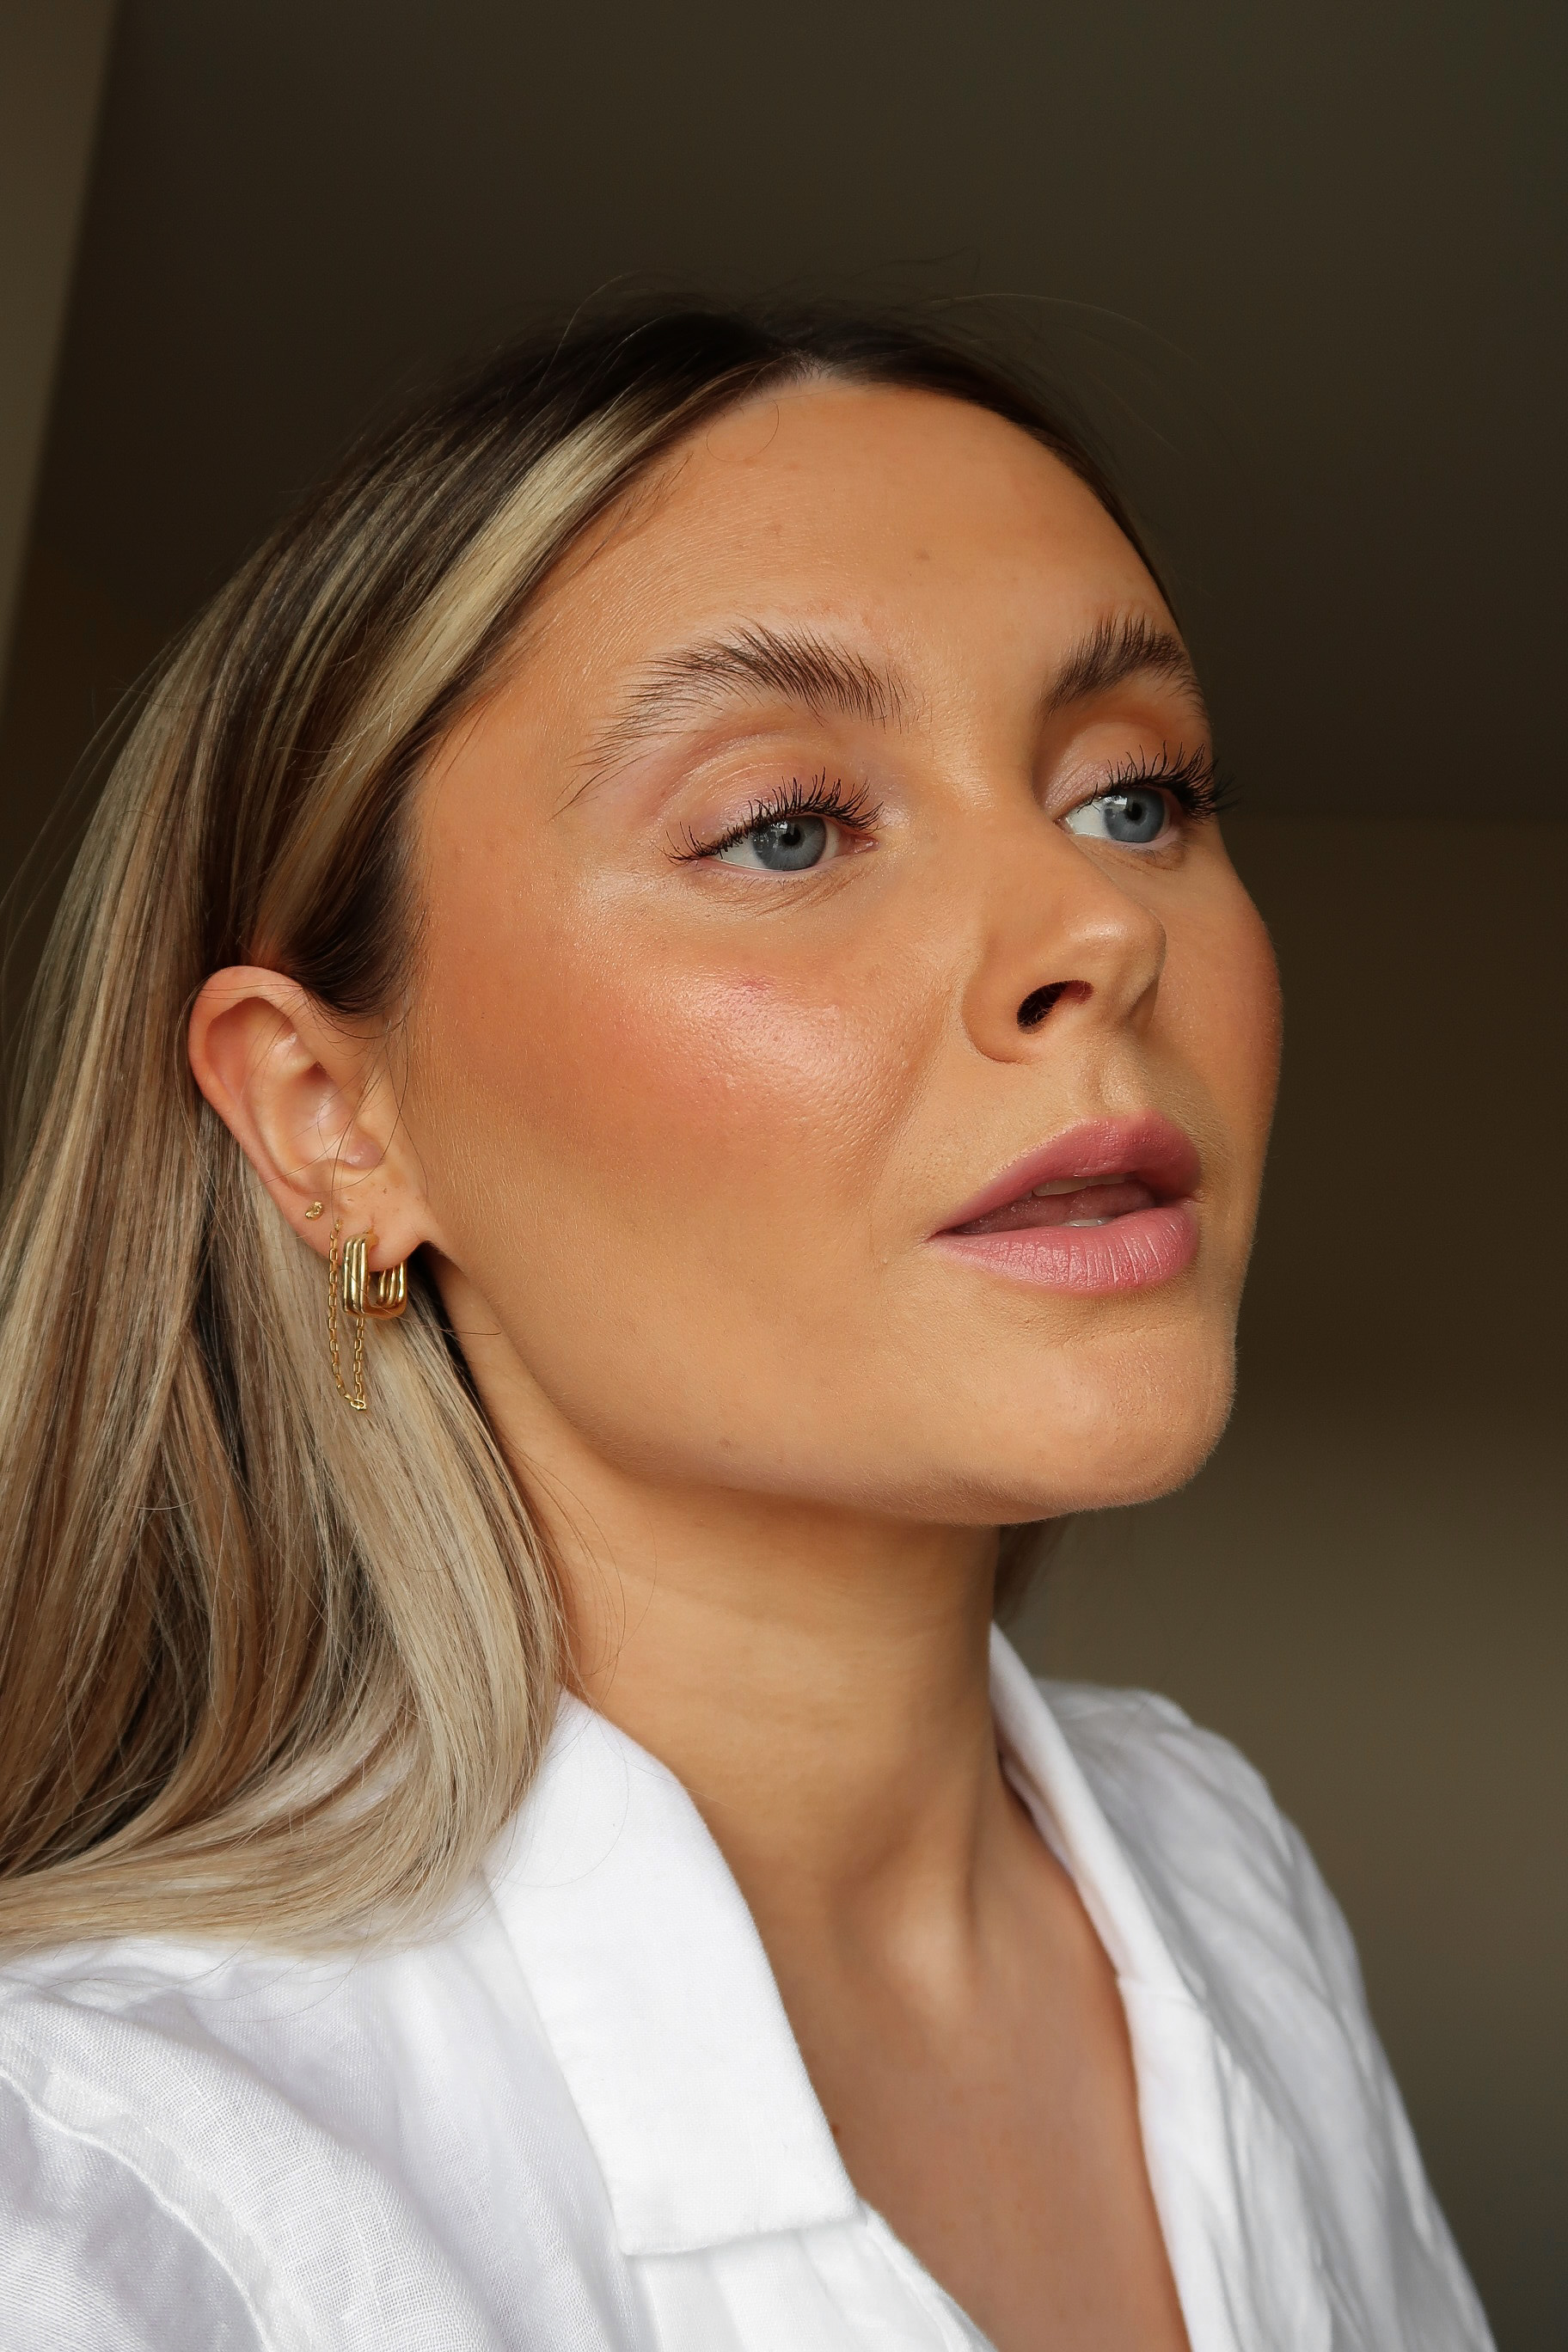 I Just Tried Clinique’s New Foundation, and It Makes My Skin Look Incredible